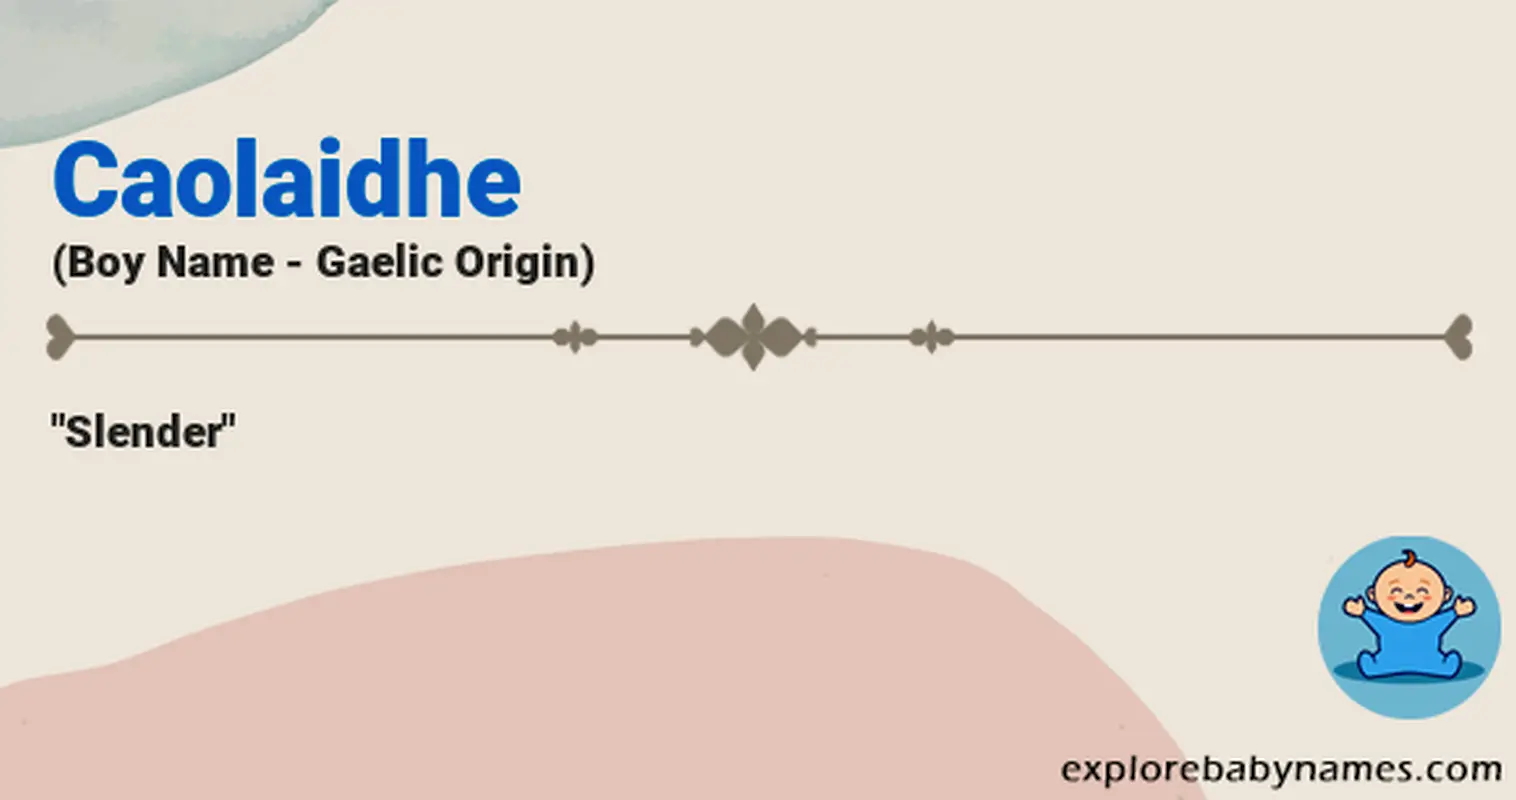 Meaning of Caolaidhe